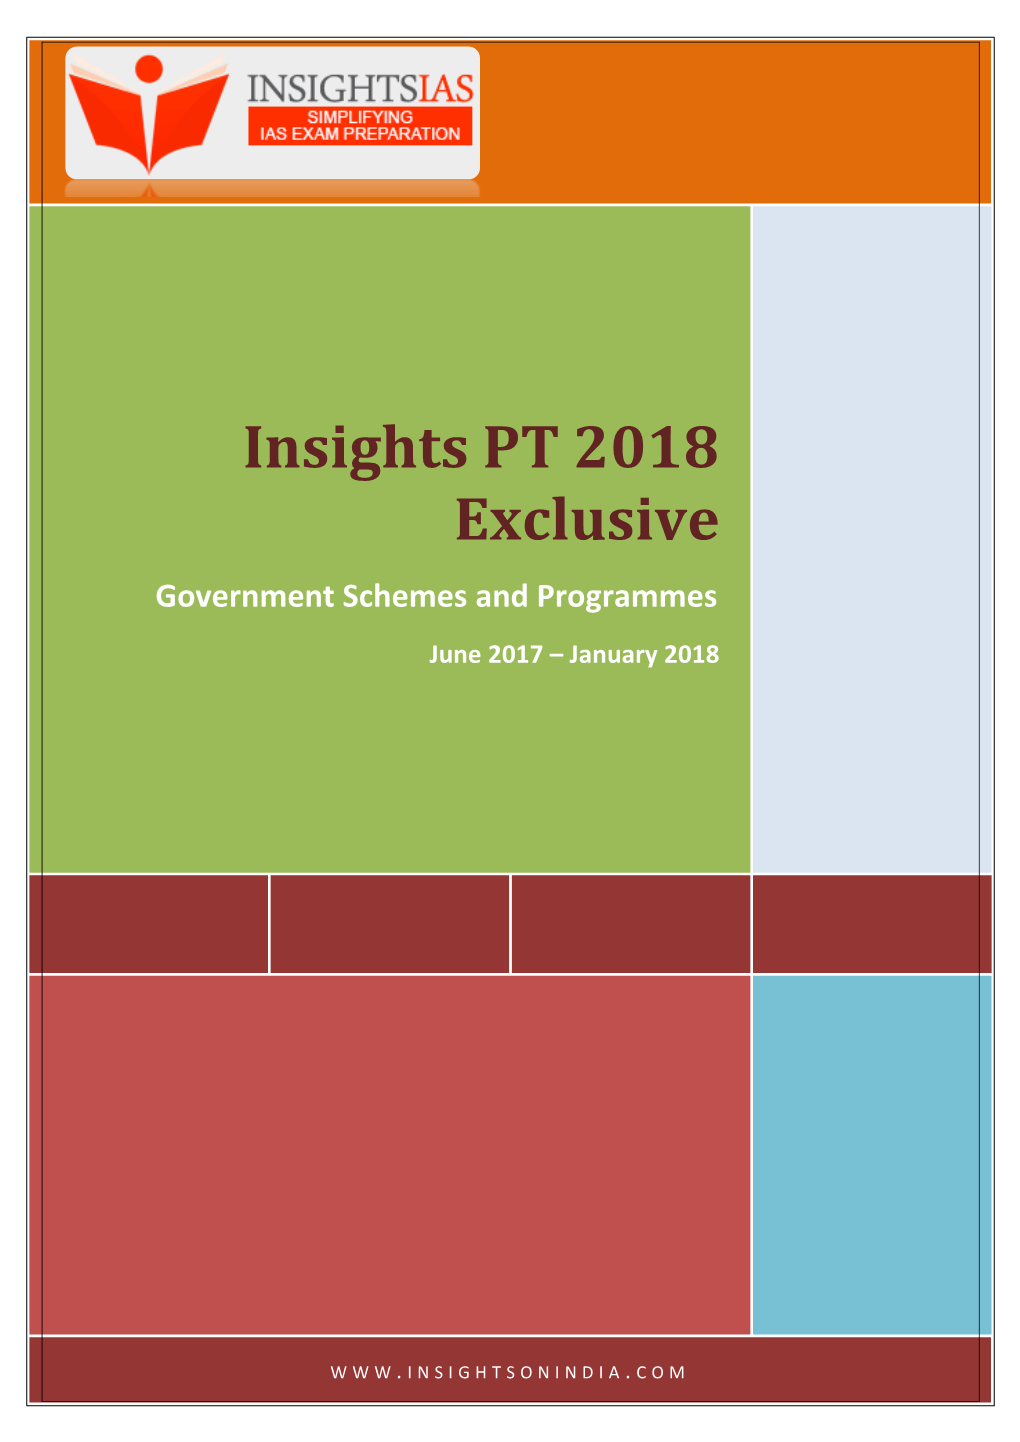 Insights PT 2018 Exclusive (Government Schemes)